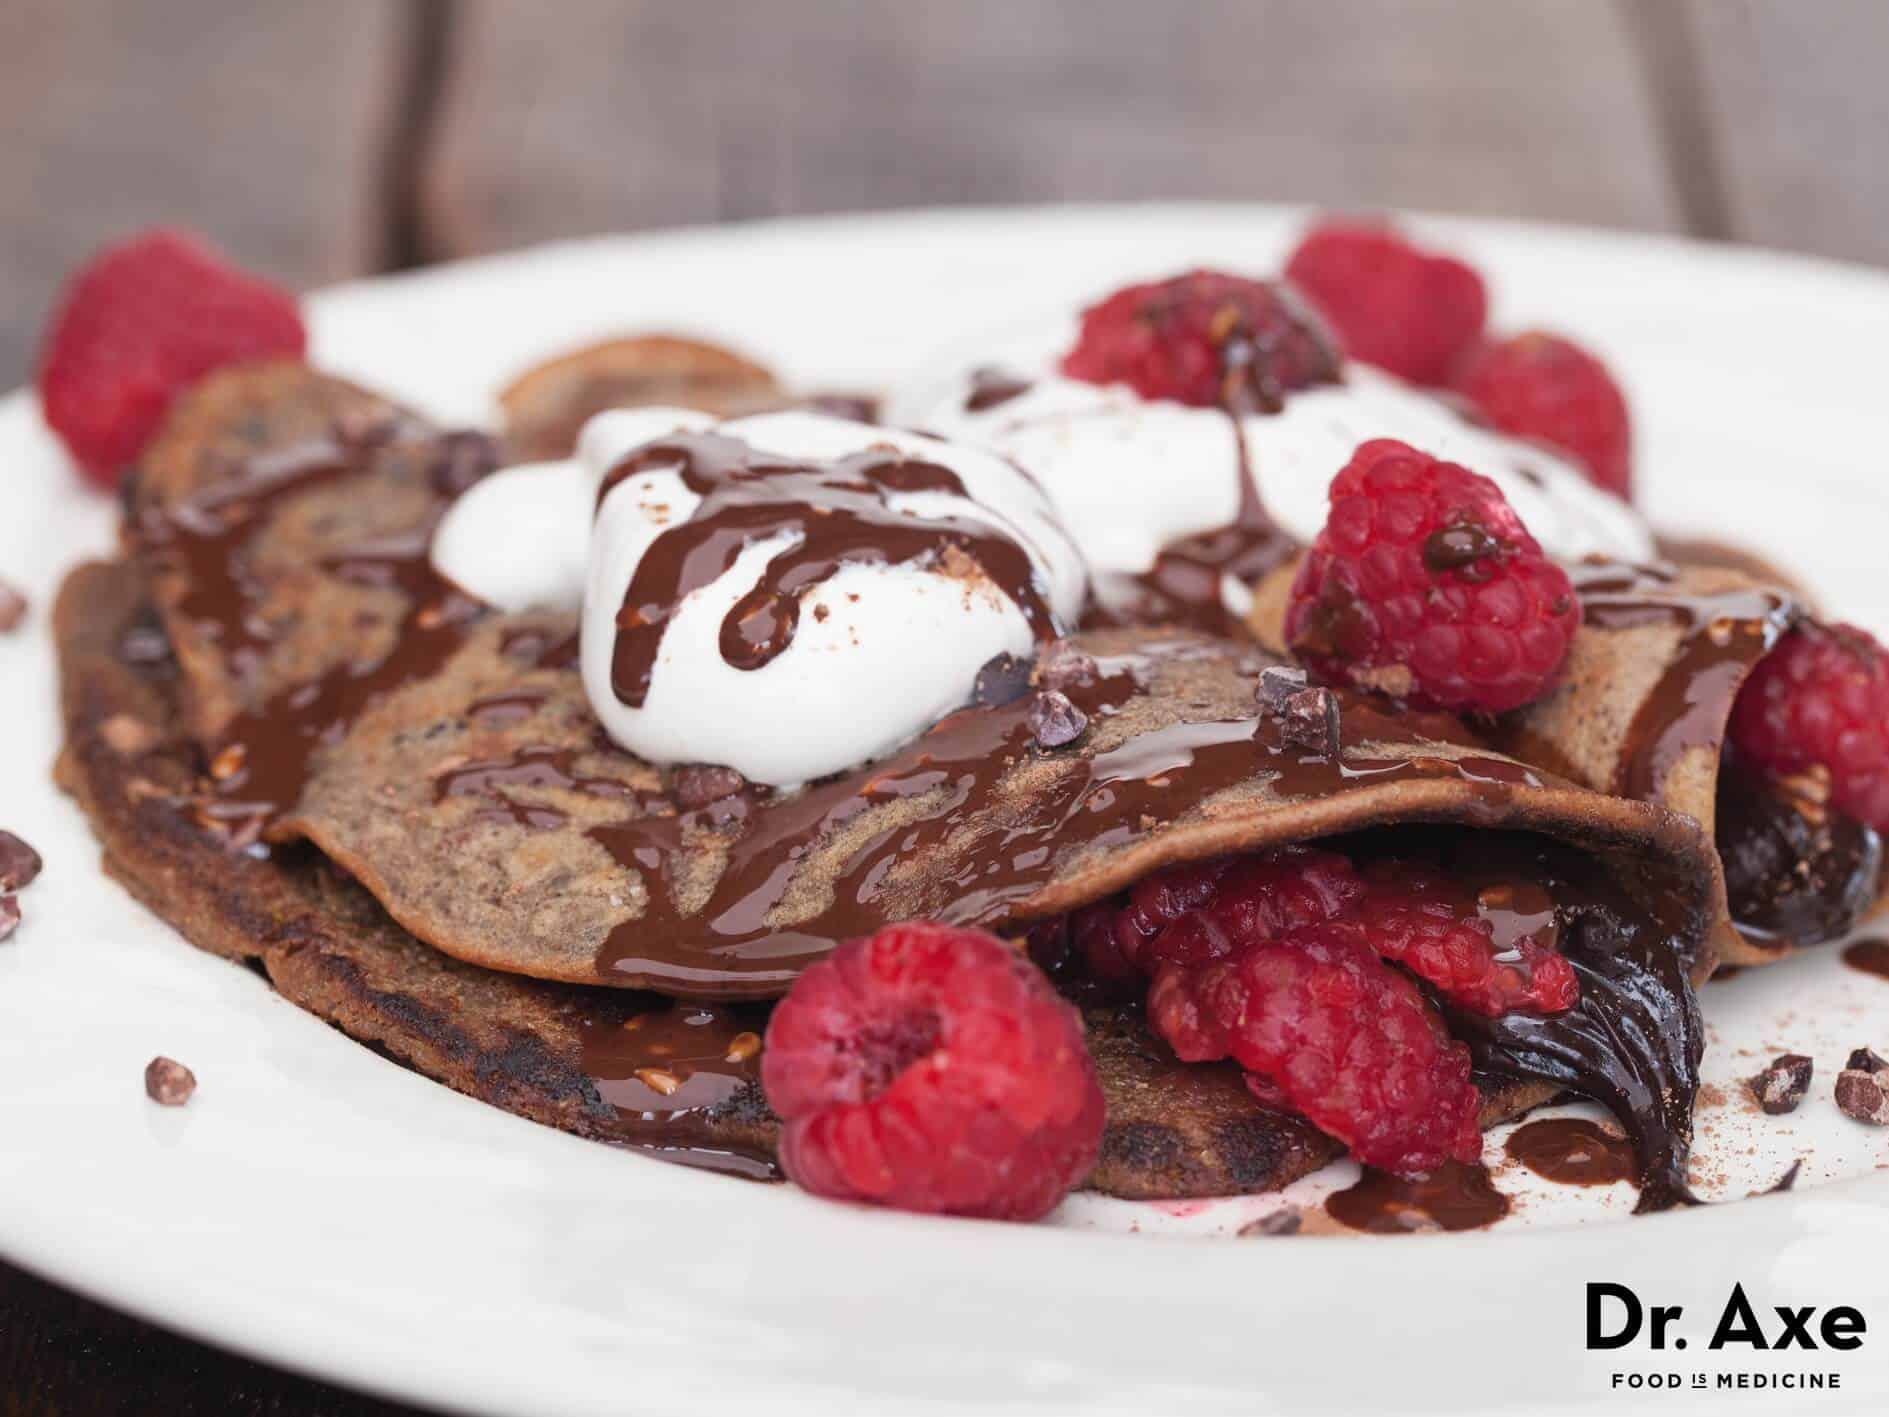 Chocolate crepes with raspberry sauce recipe - Dr. Axe